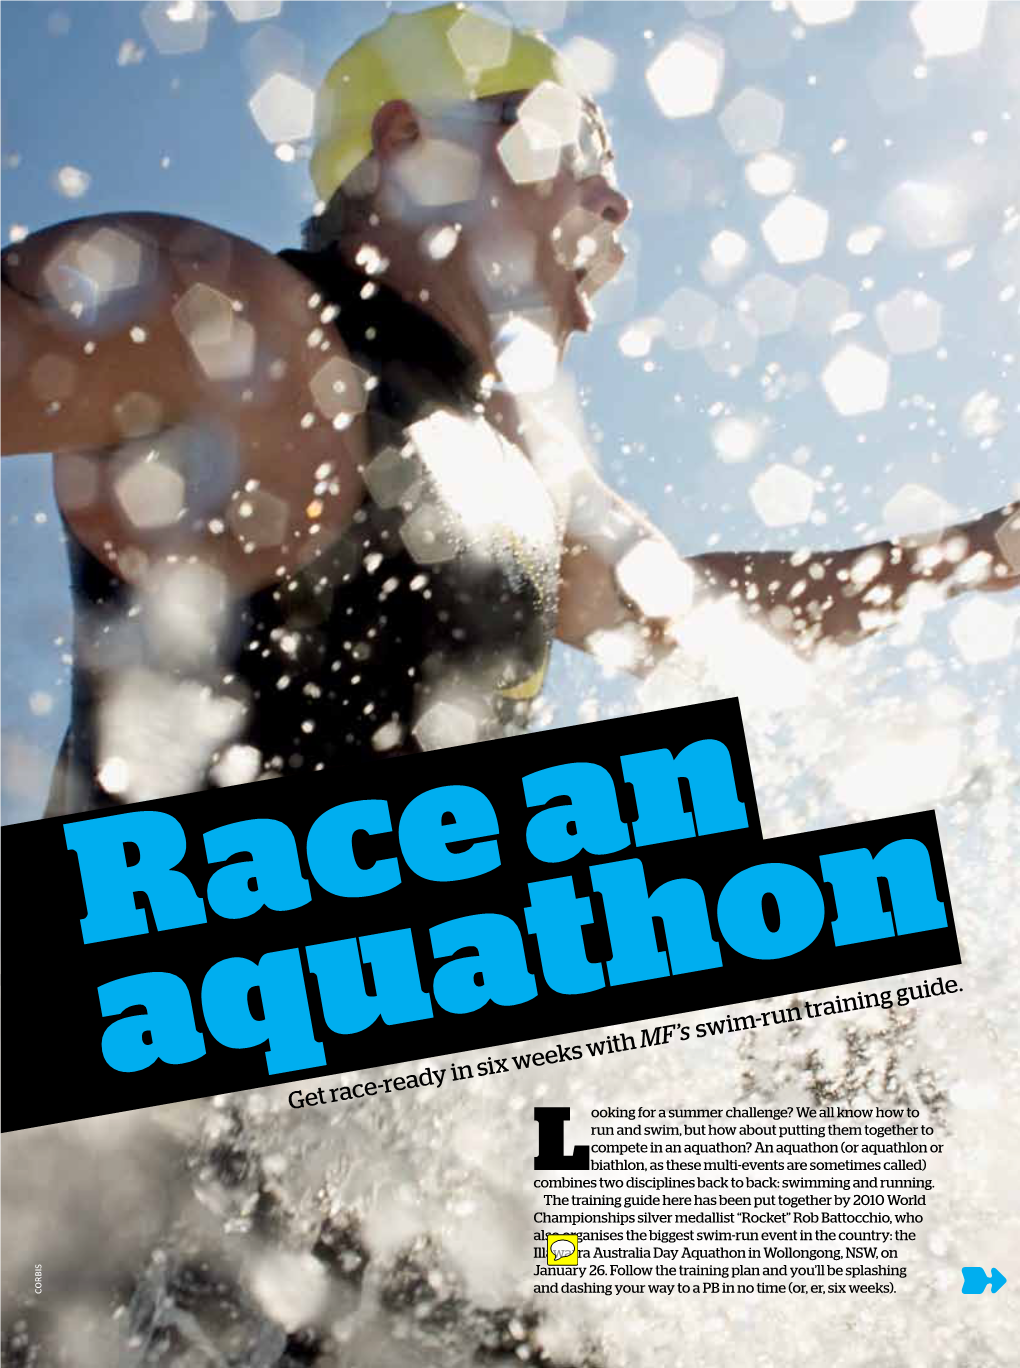 Get Race-Ready in Six Weeks with MF's Swim-Run Training Guide